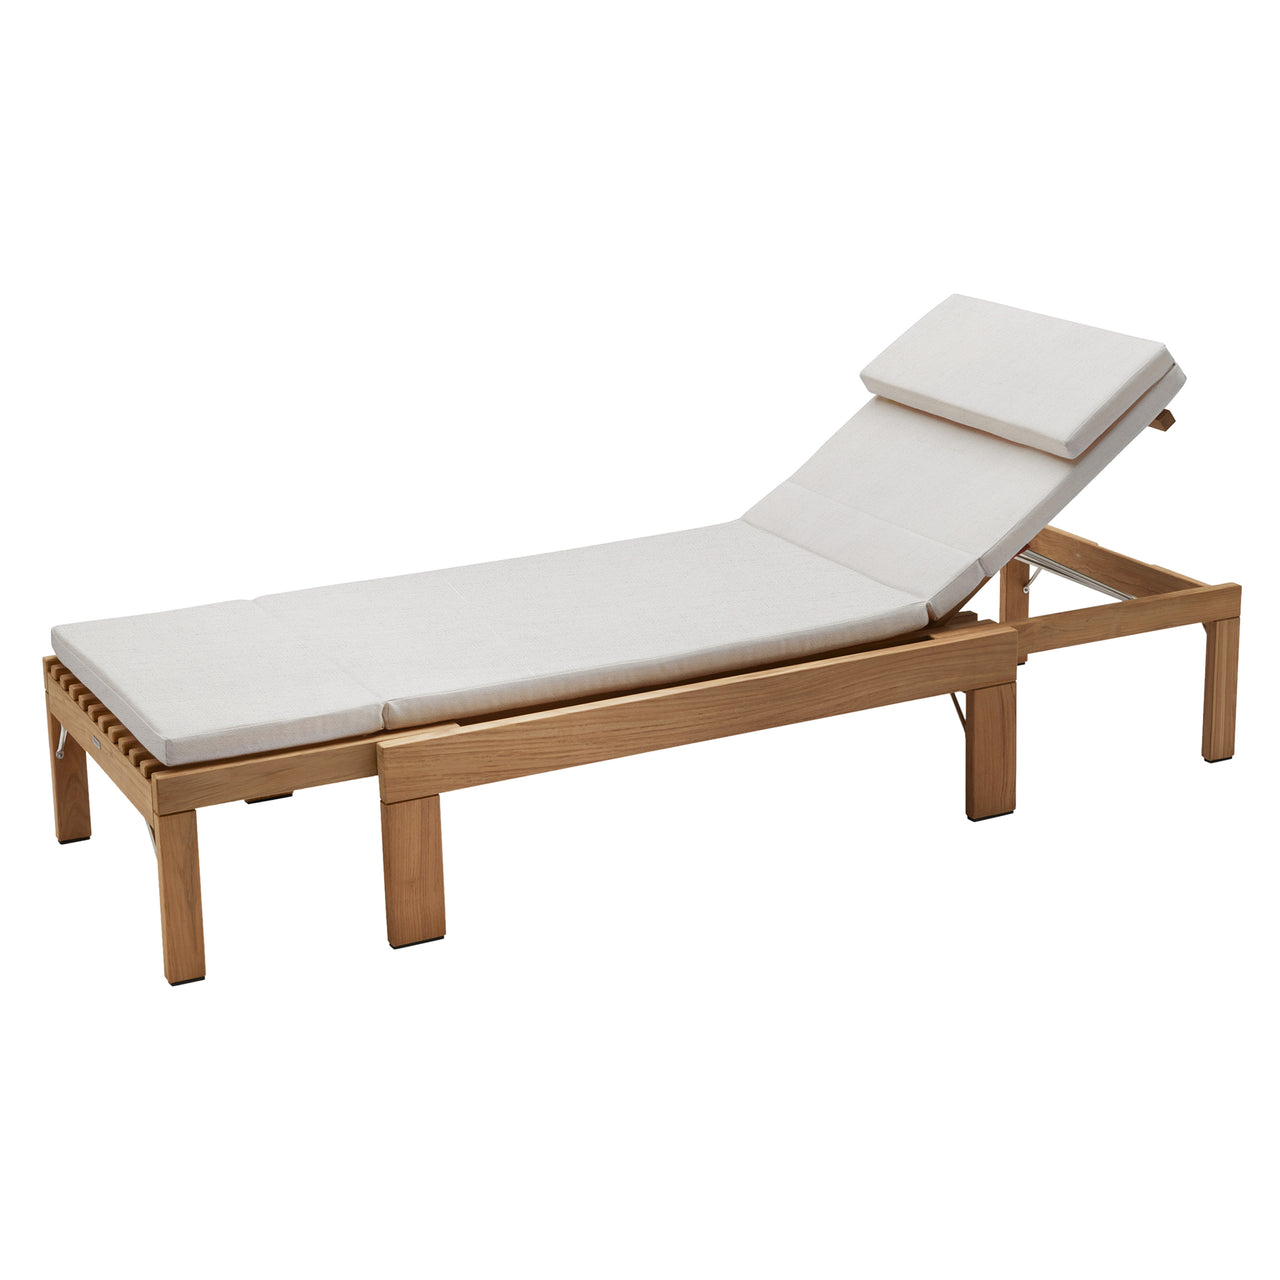 Riviera Sunbed: With Papyrus Cushion